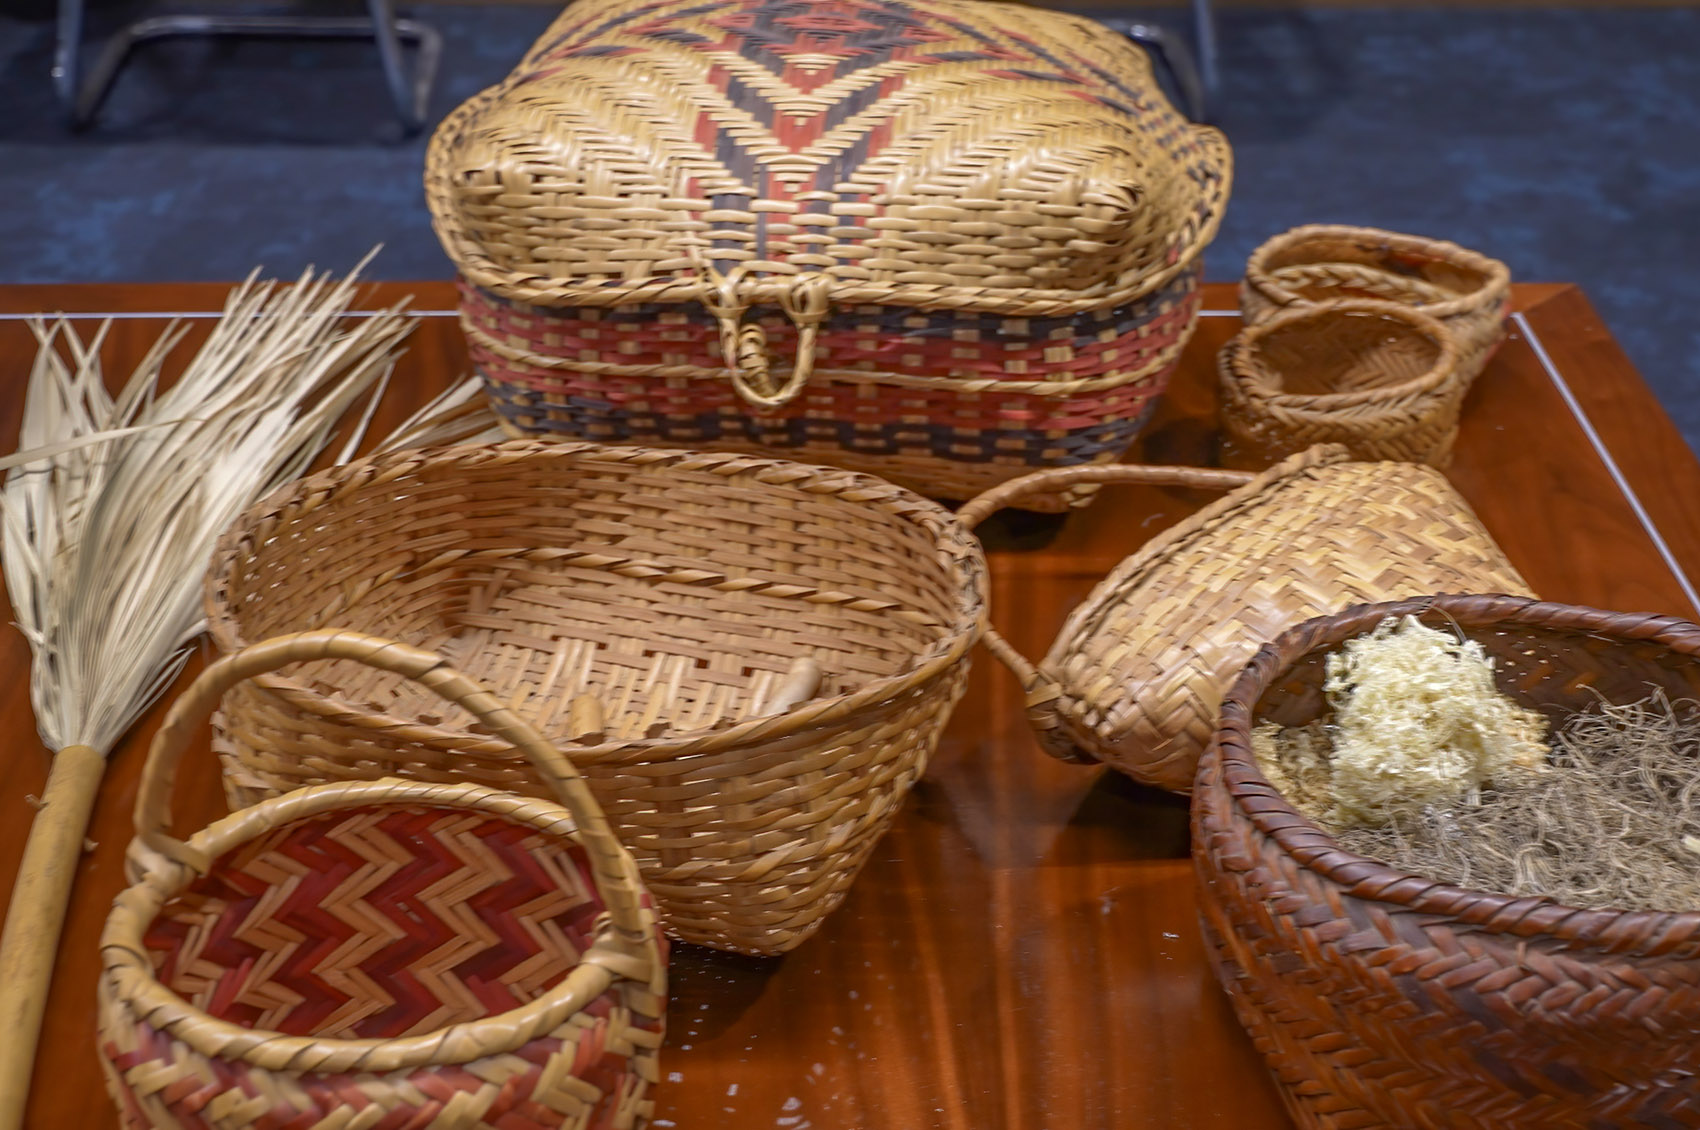 hand woven baskets of river cane